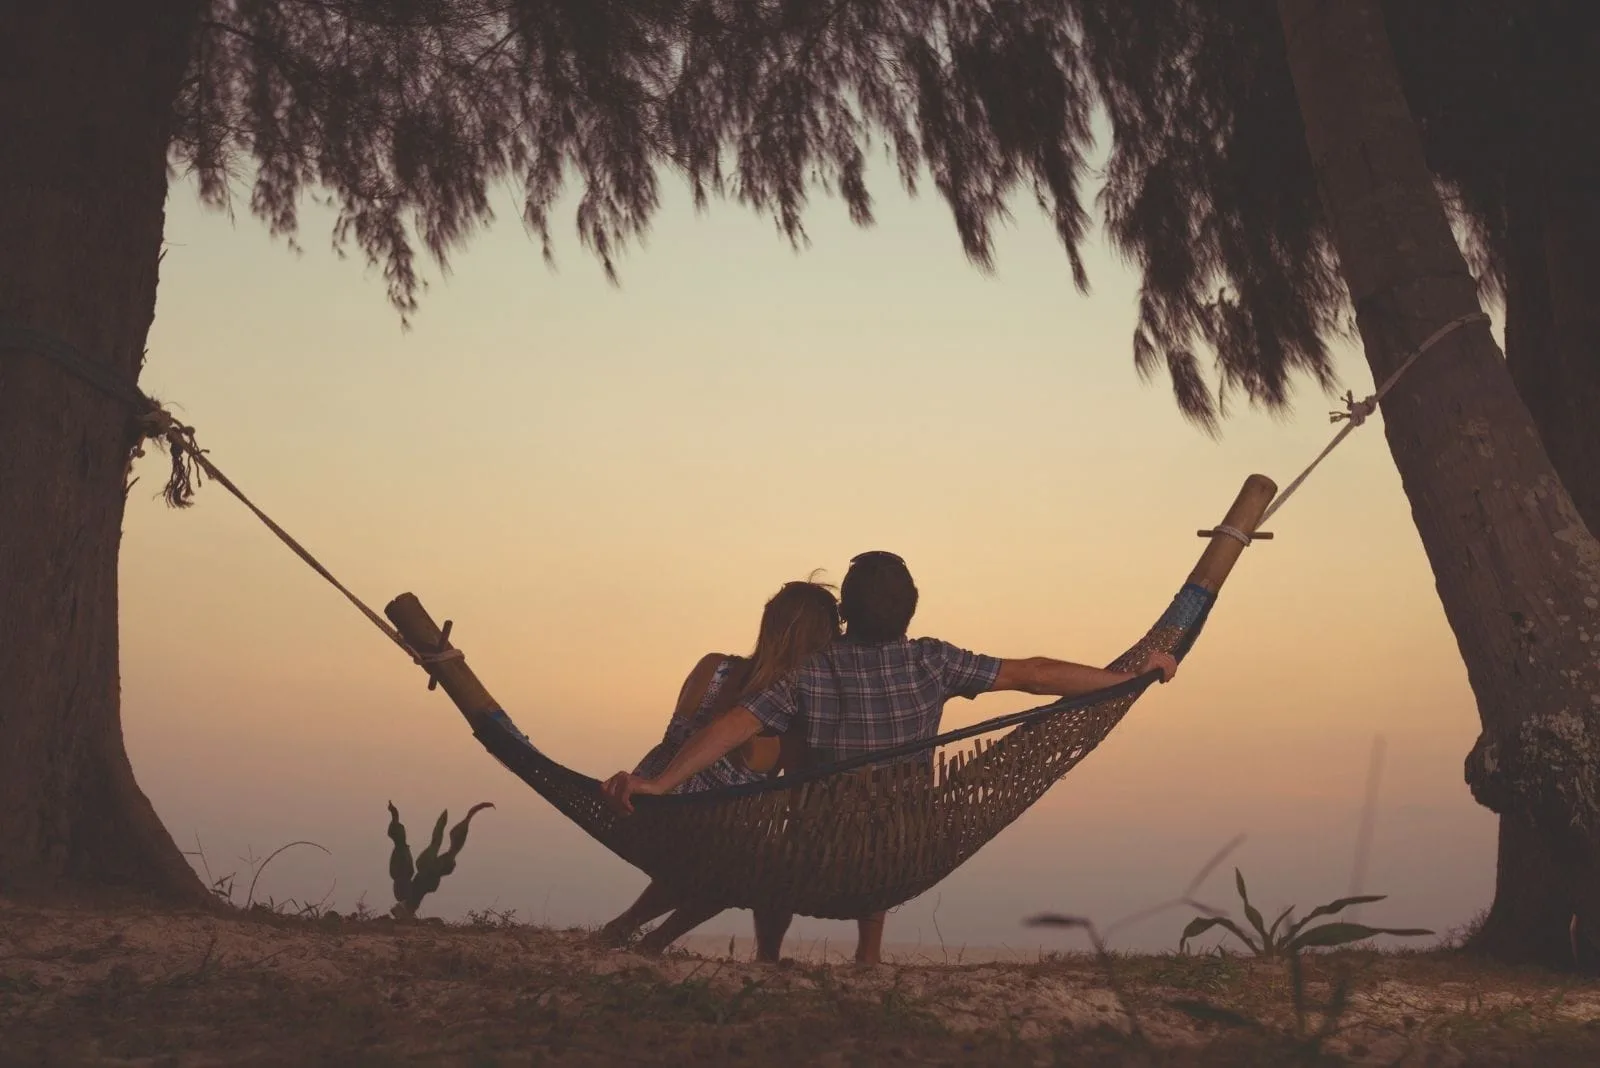 couple relaxing in a hammock hanged on trees facing the clouds on golden hour